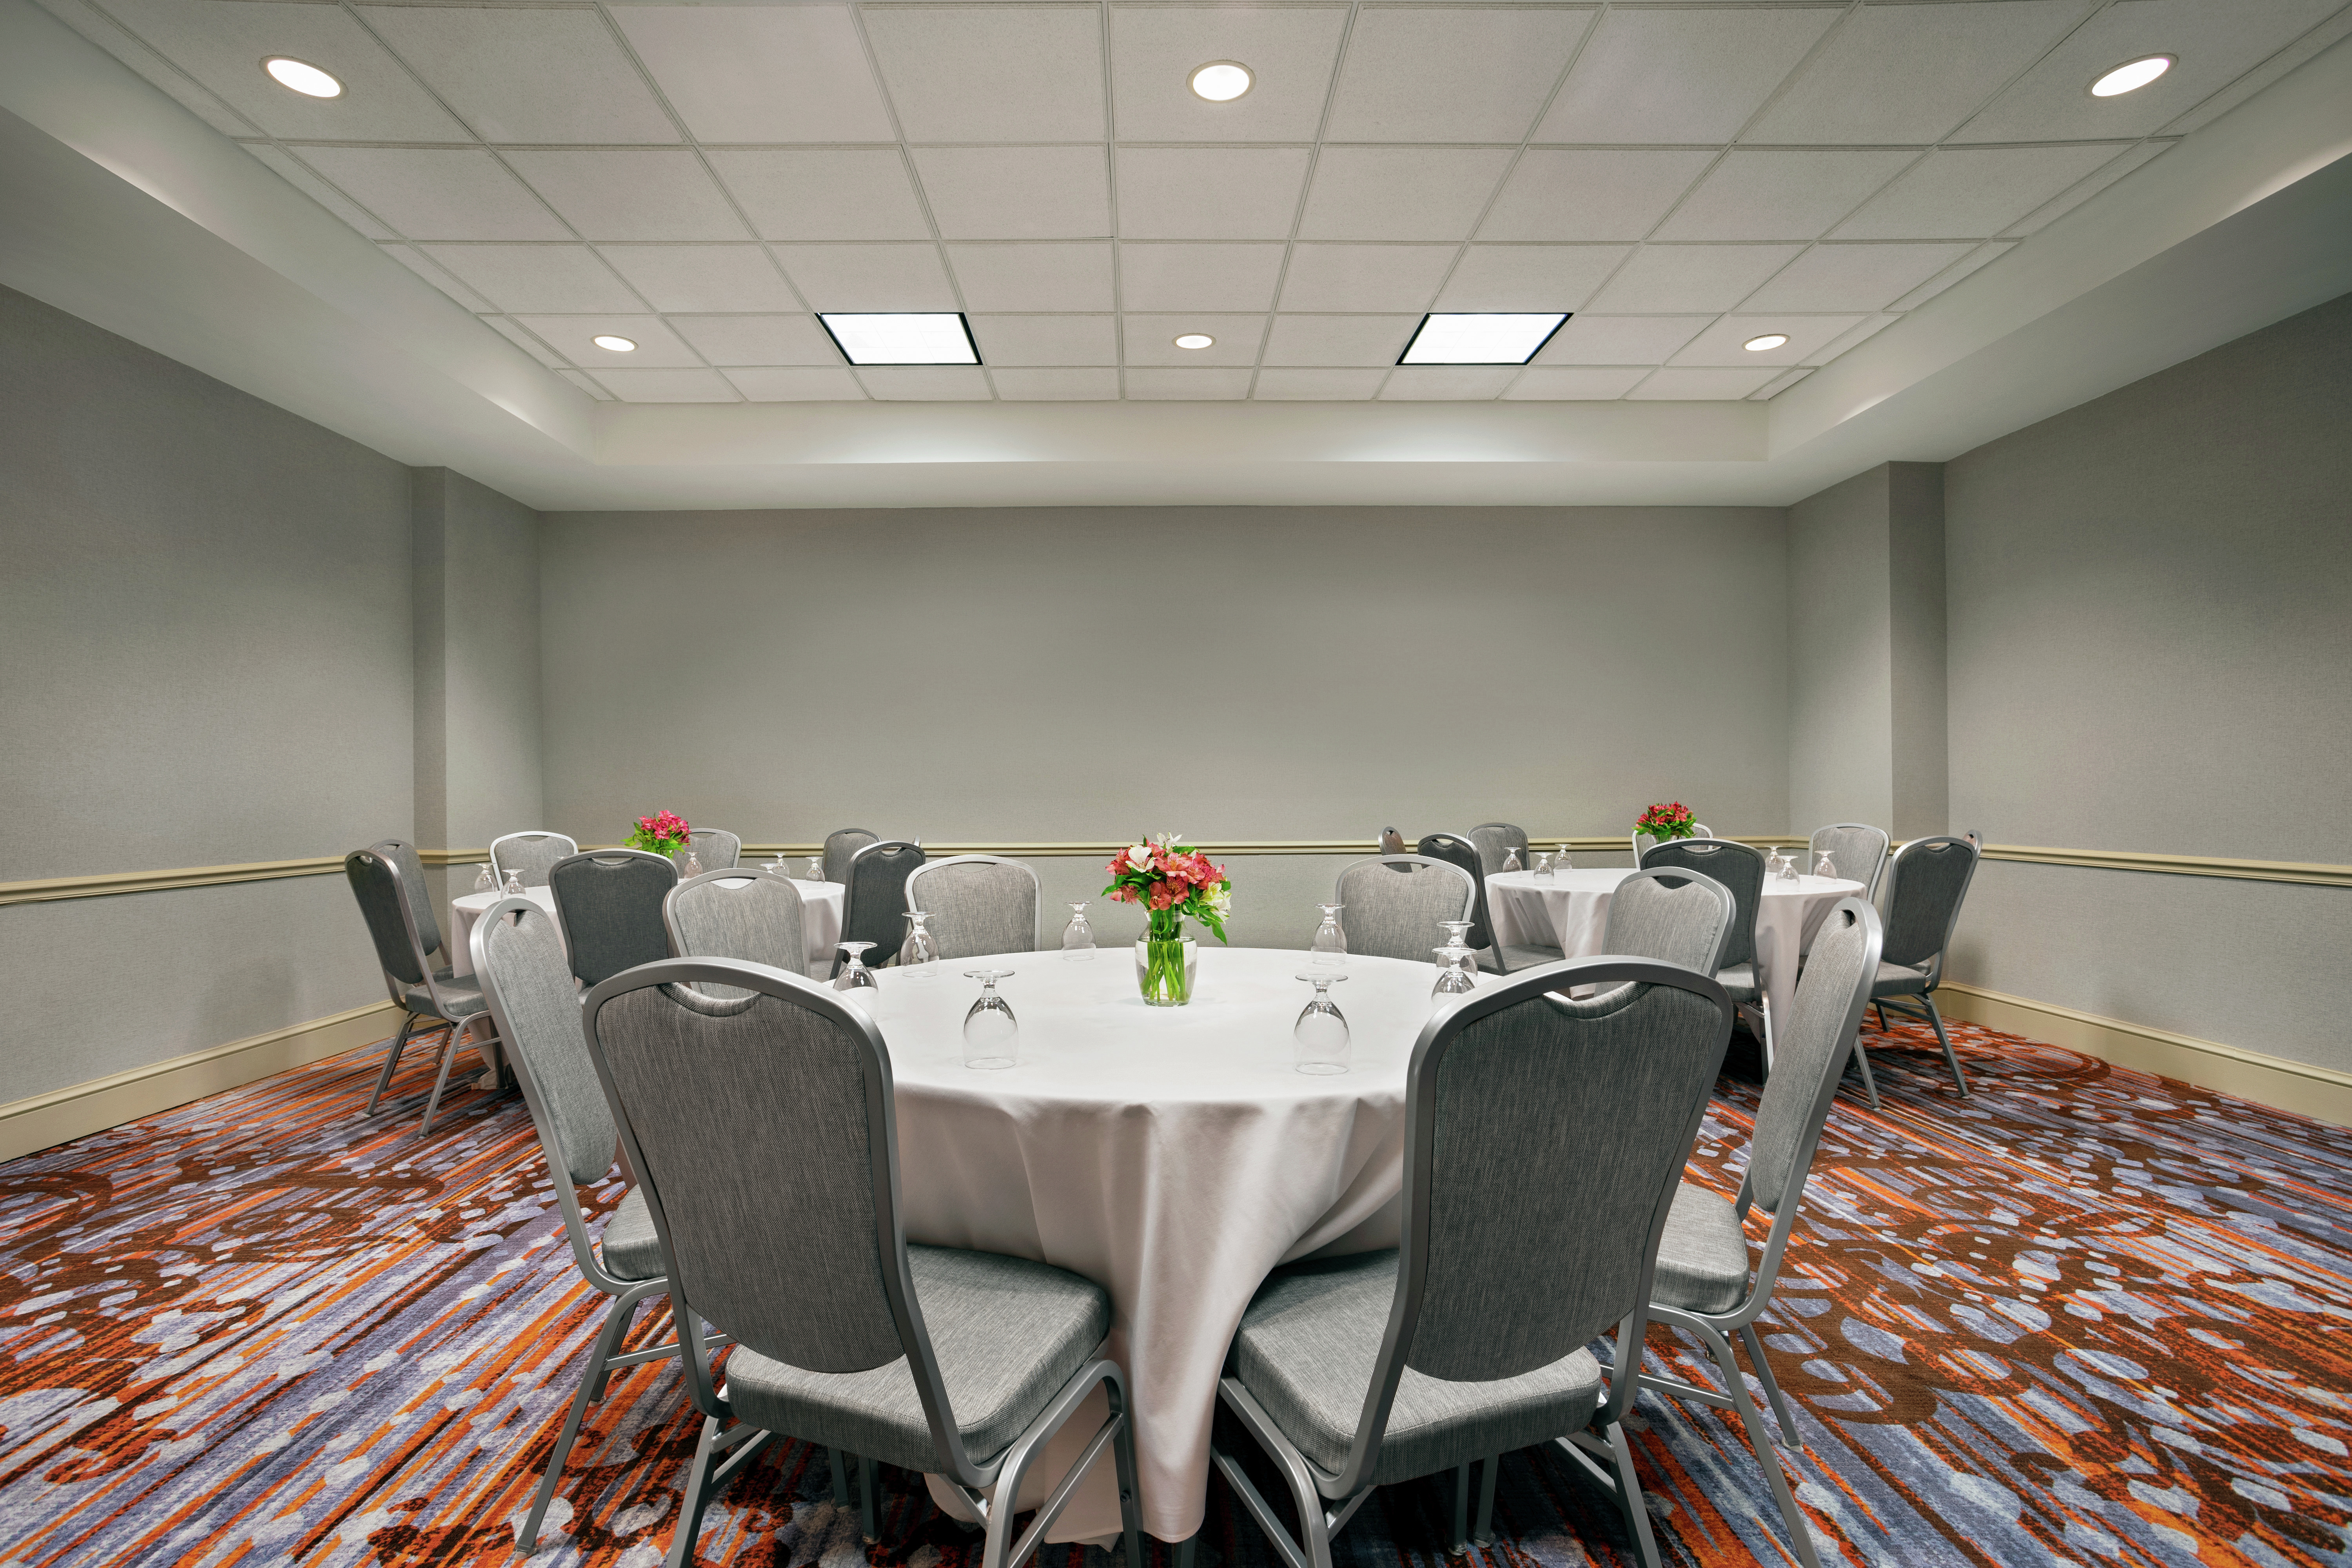 St. Charles Meeting Room with Round Banquet Tables